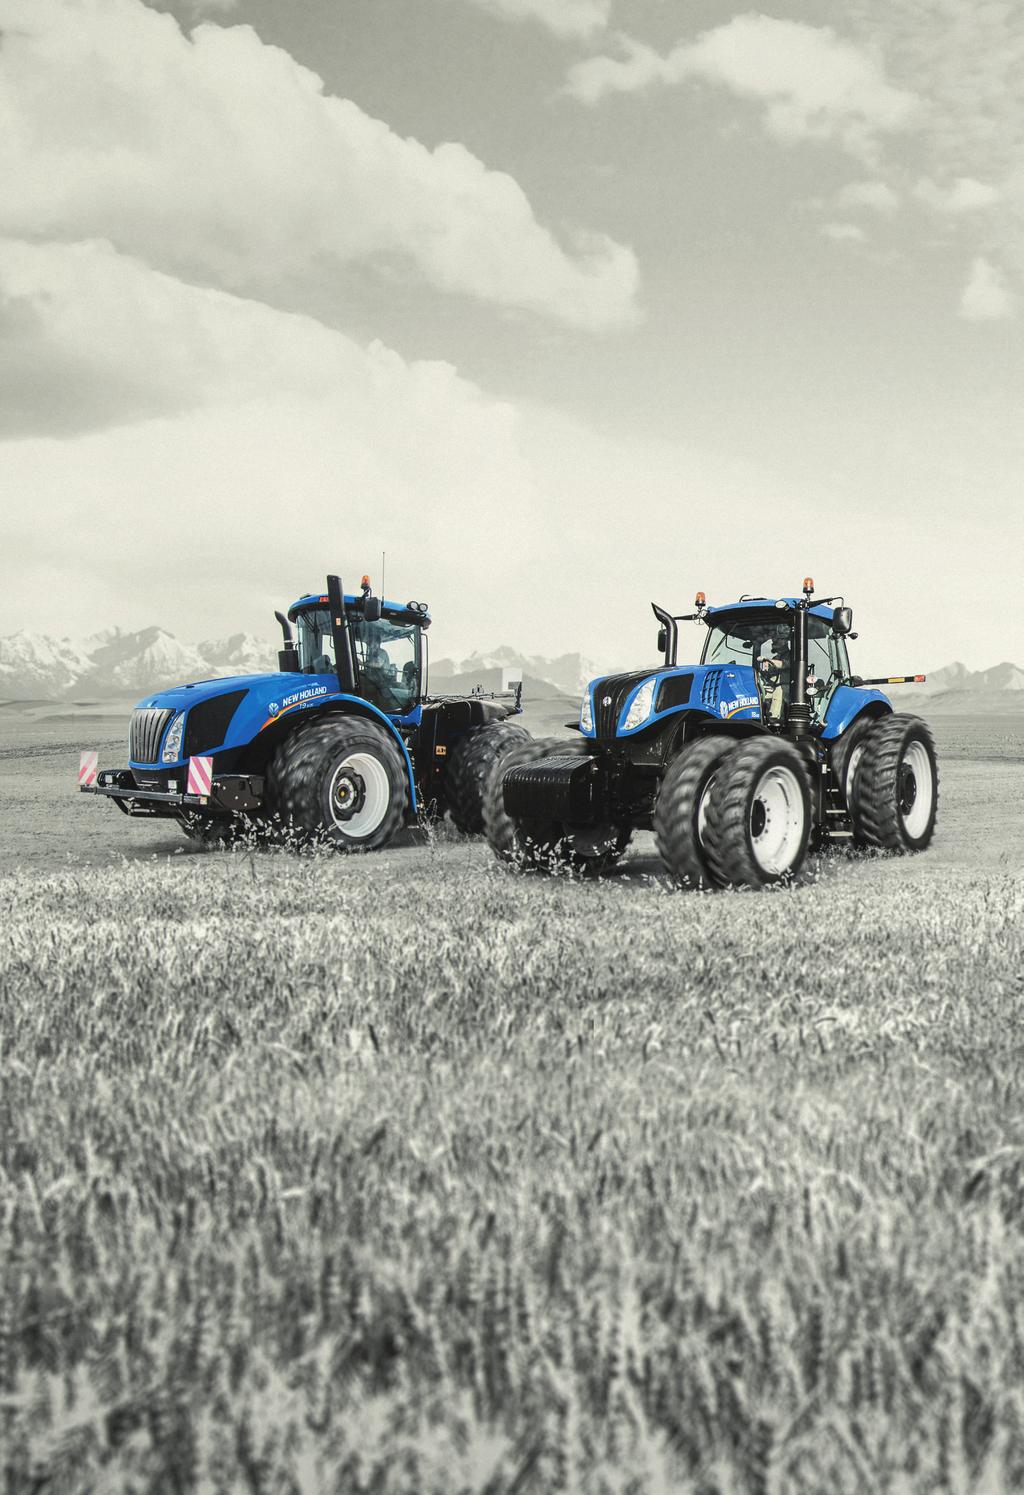 THE POWER TO PERFORM WITH UP TO 682 HORSEPOWER The GENESIS T8 Series and T9 4WD Series tractors are built to out perform the competition.